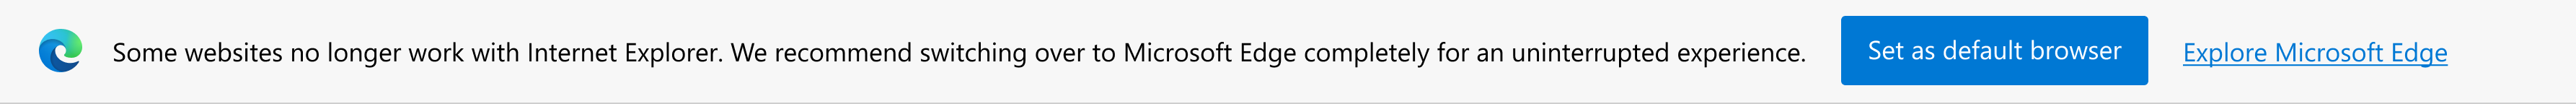 Notification about modern sites and prompt to set Microsoft Edge as default browser or explore Microsoft Edge